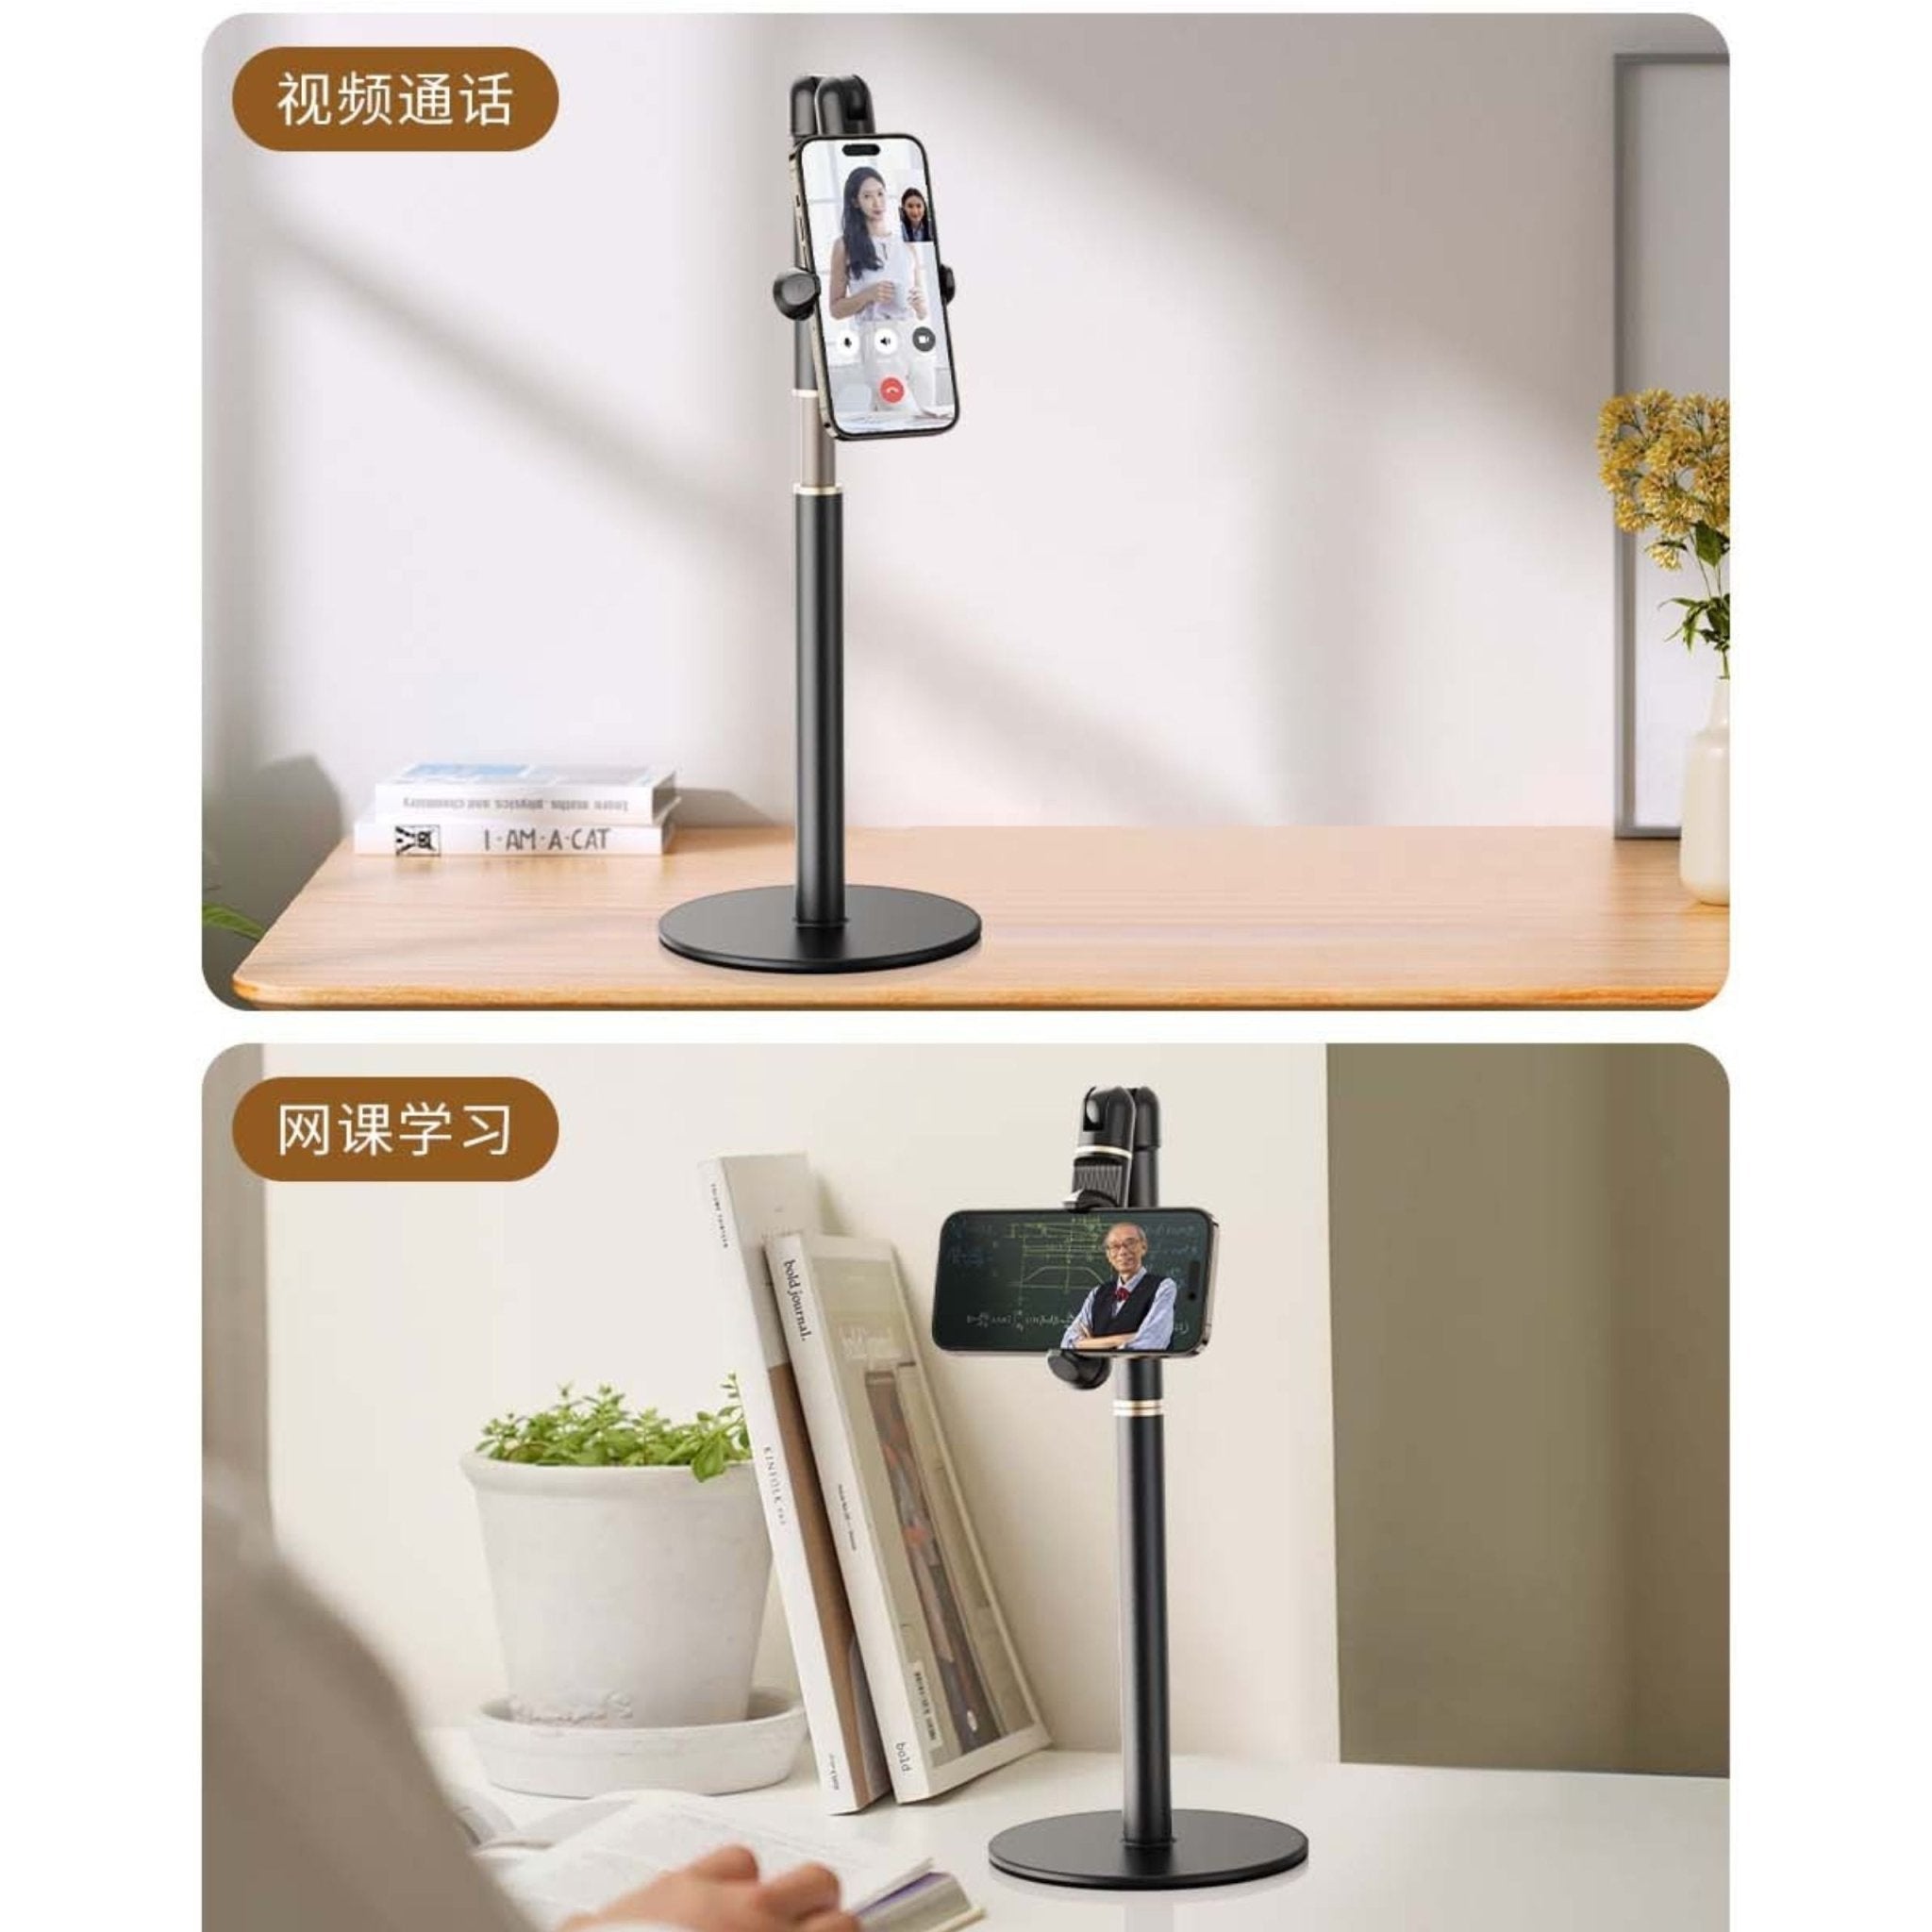 Adjustable Height Leveled Table Top Phone Holder Stand 4.7-7 inches - Black